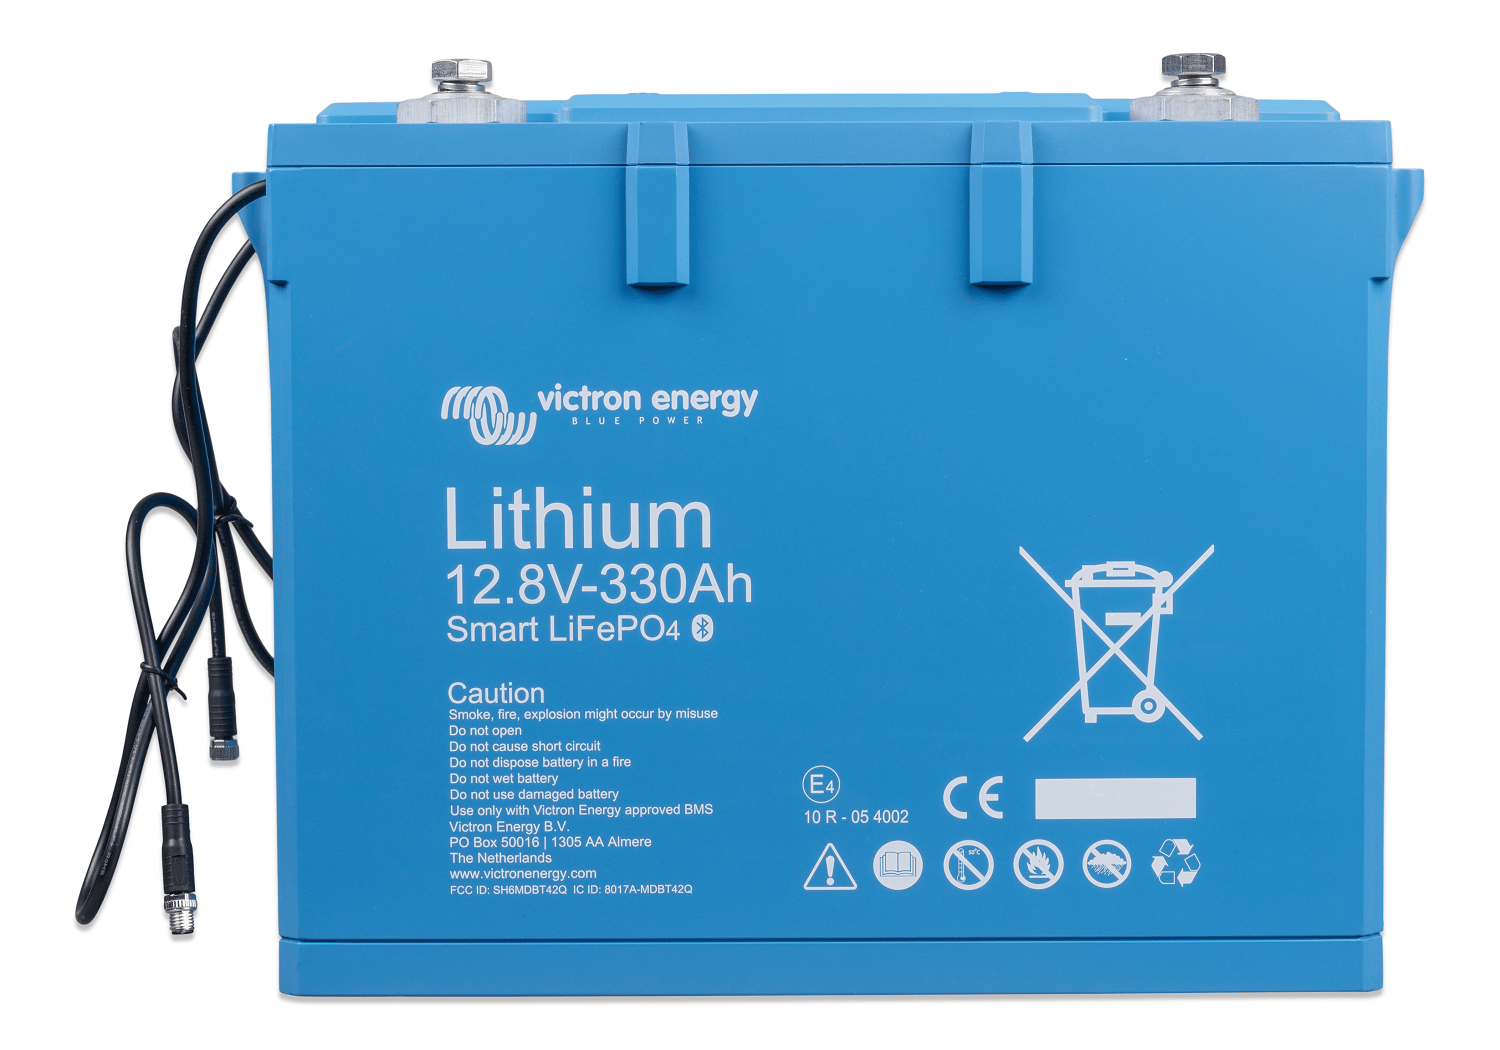 Does the Victron Smart Lithium Battery BAT512132410 support a high charge current?